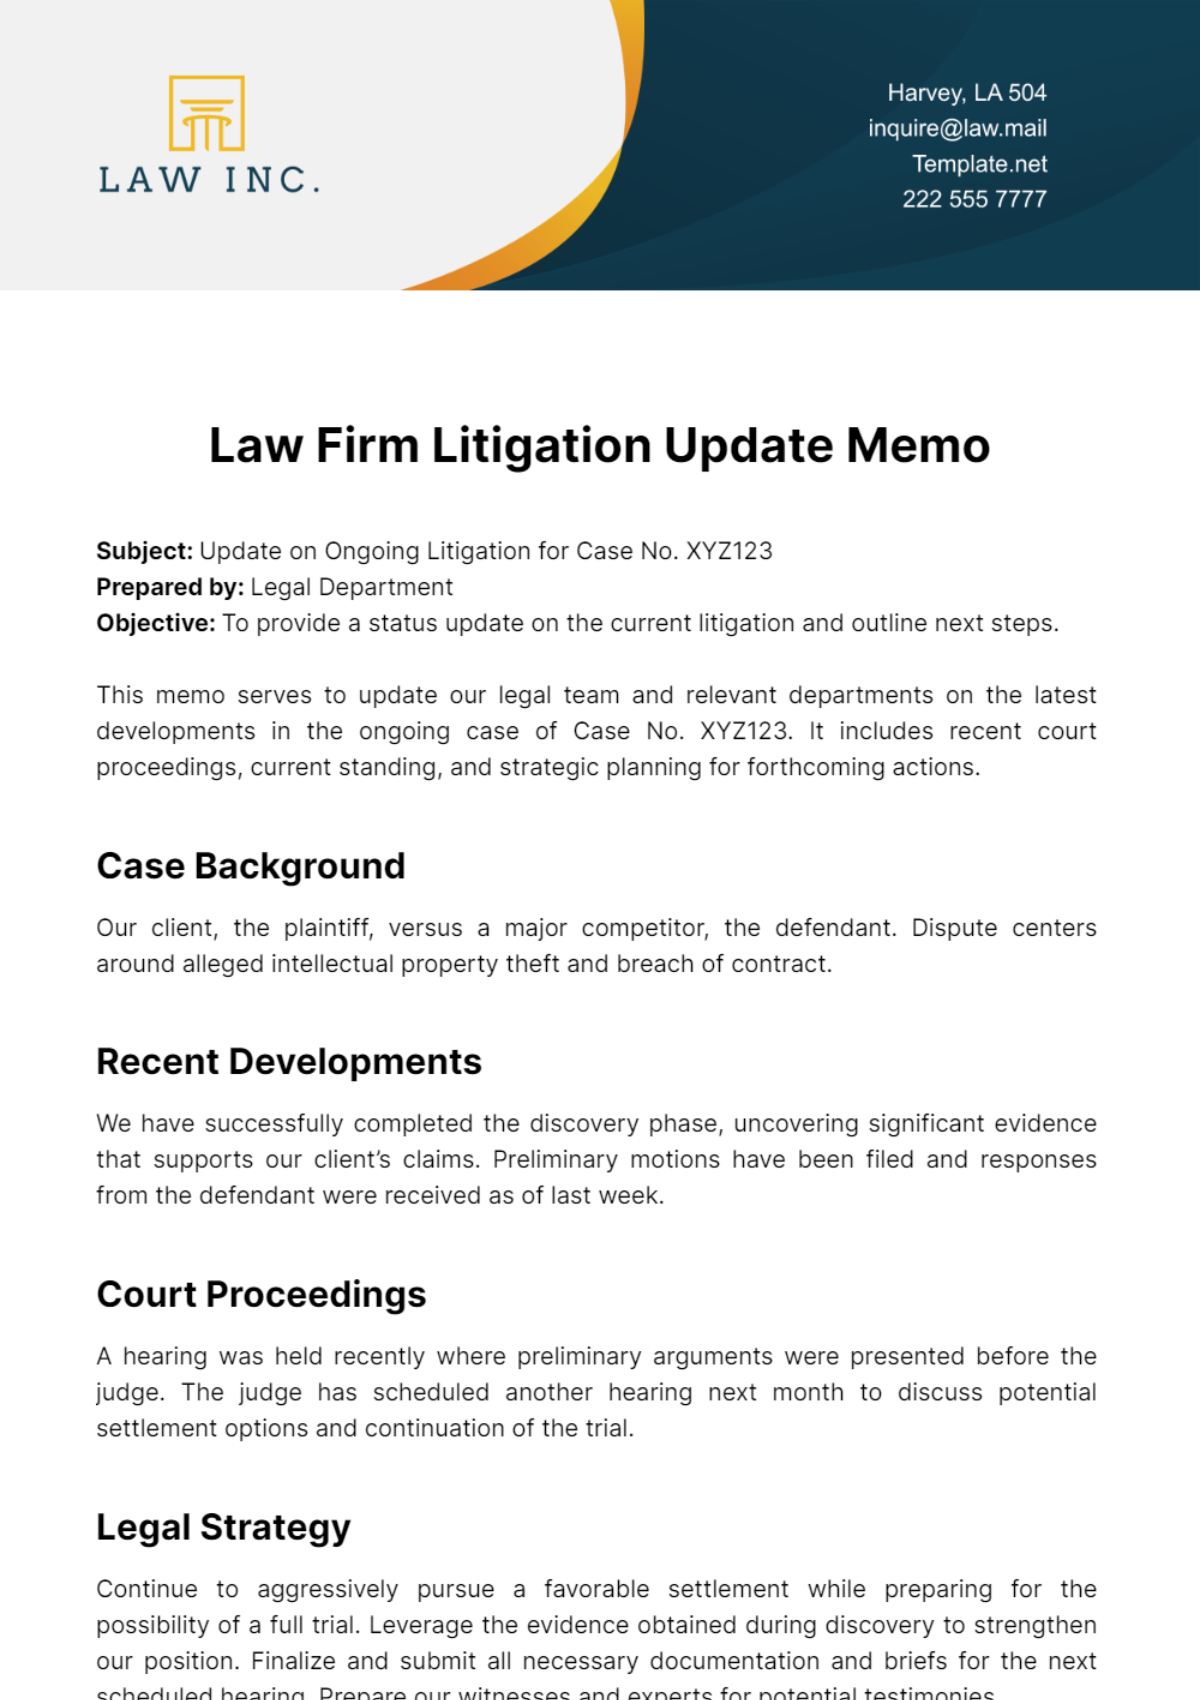 Law Firm Litigation Update Memo Template